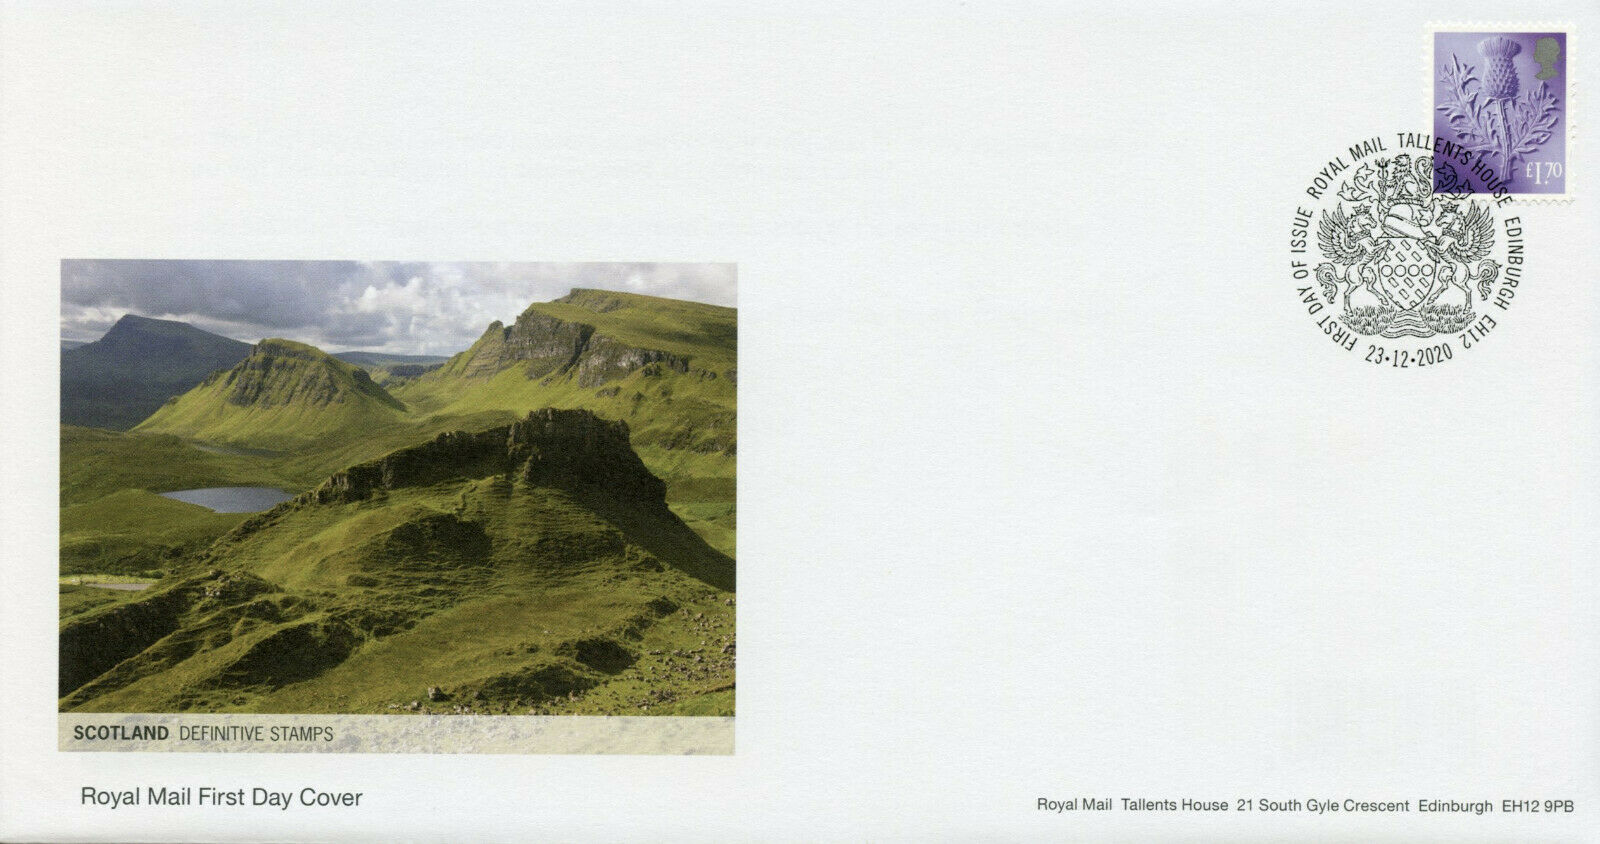 GB Stamps 2021 FDC Country Definitives £1.70 Scotland 1v Set